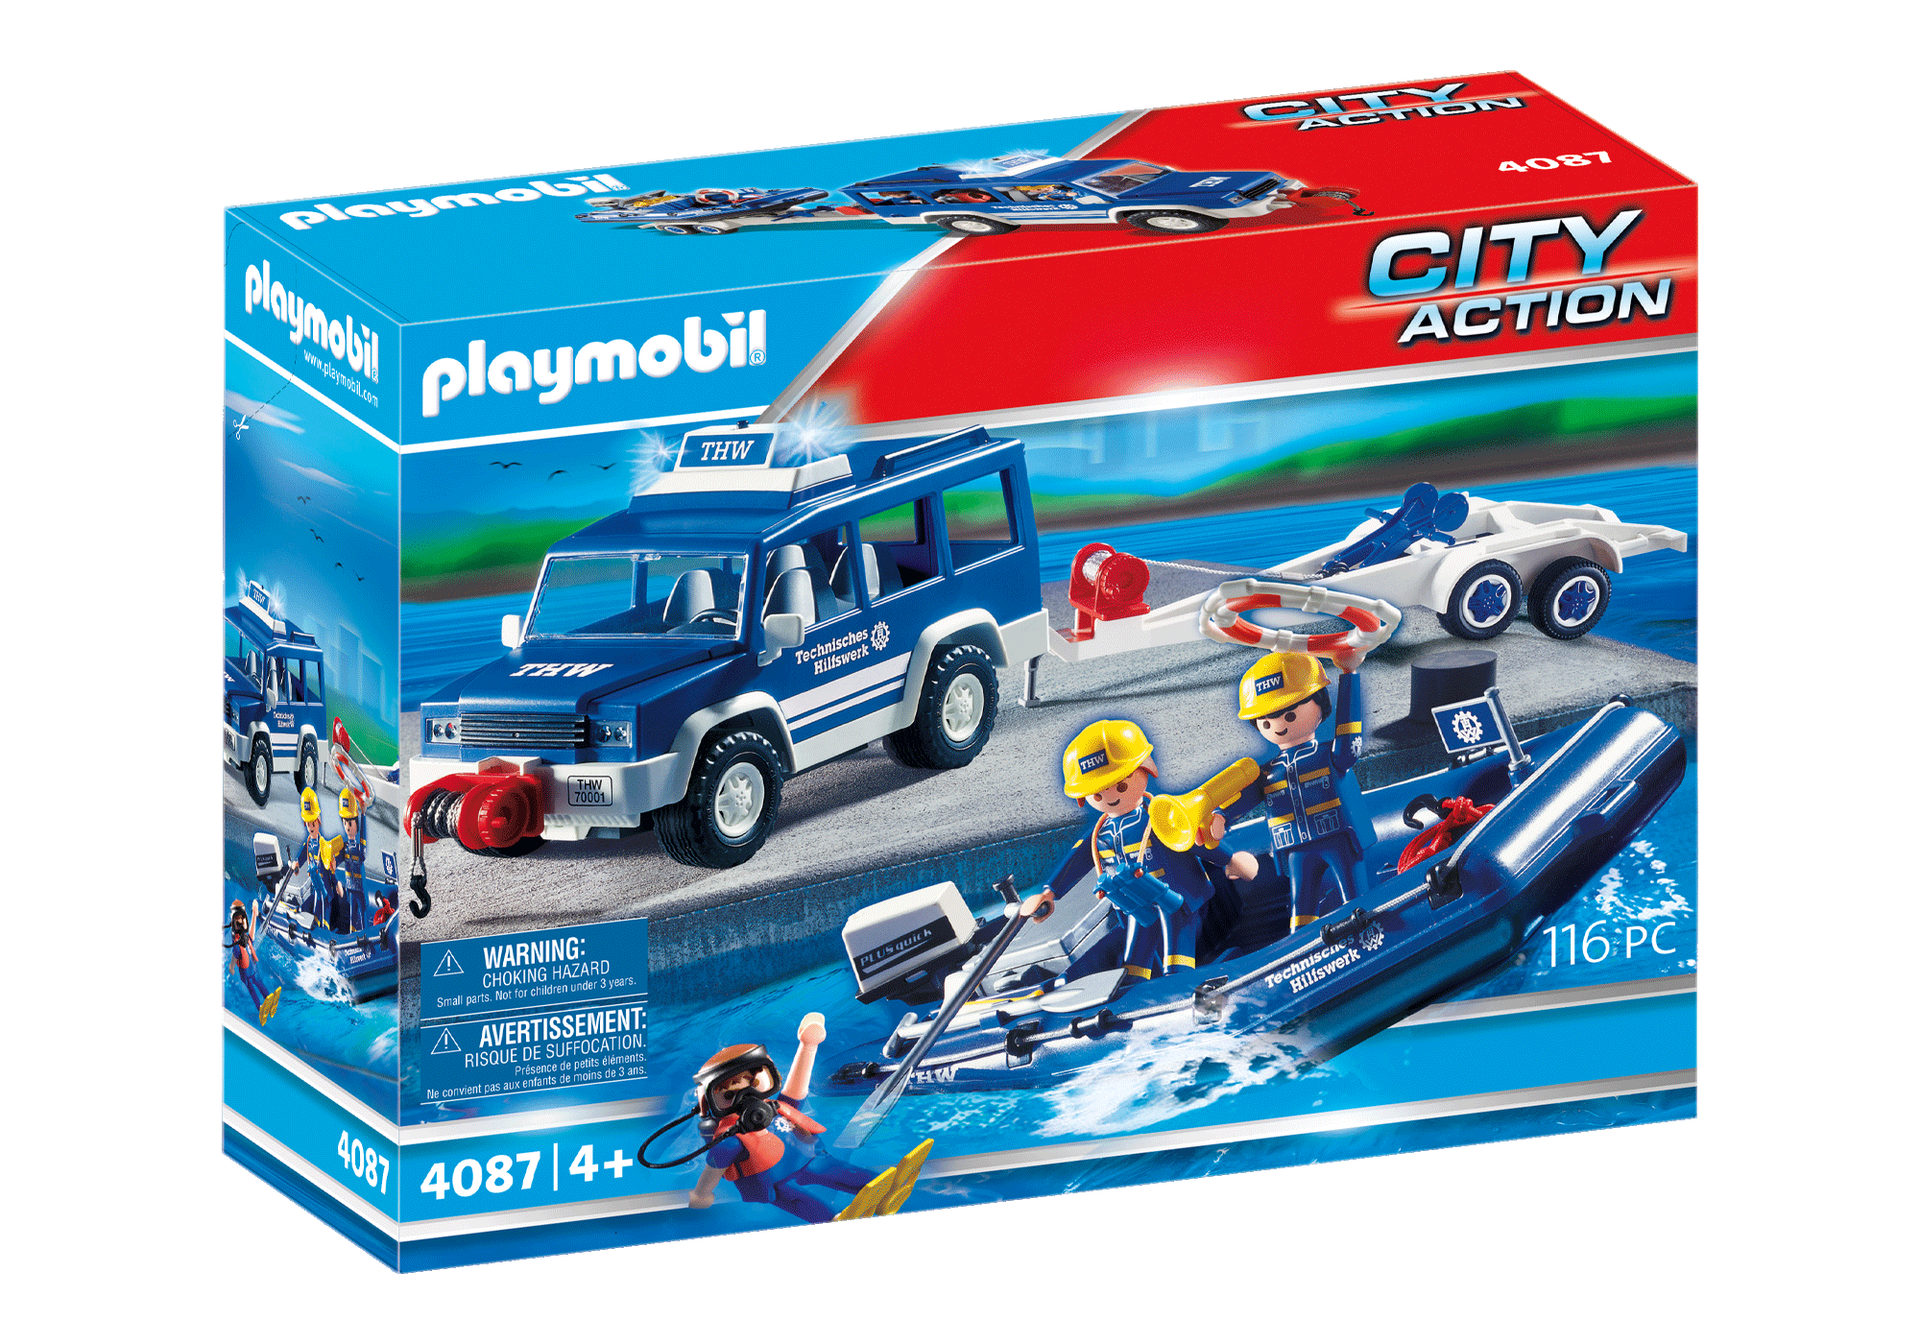 37 Pieces Playmobil City Action Lighthouse & Boat Rescue Set 